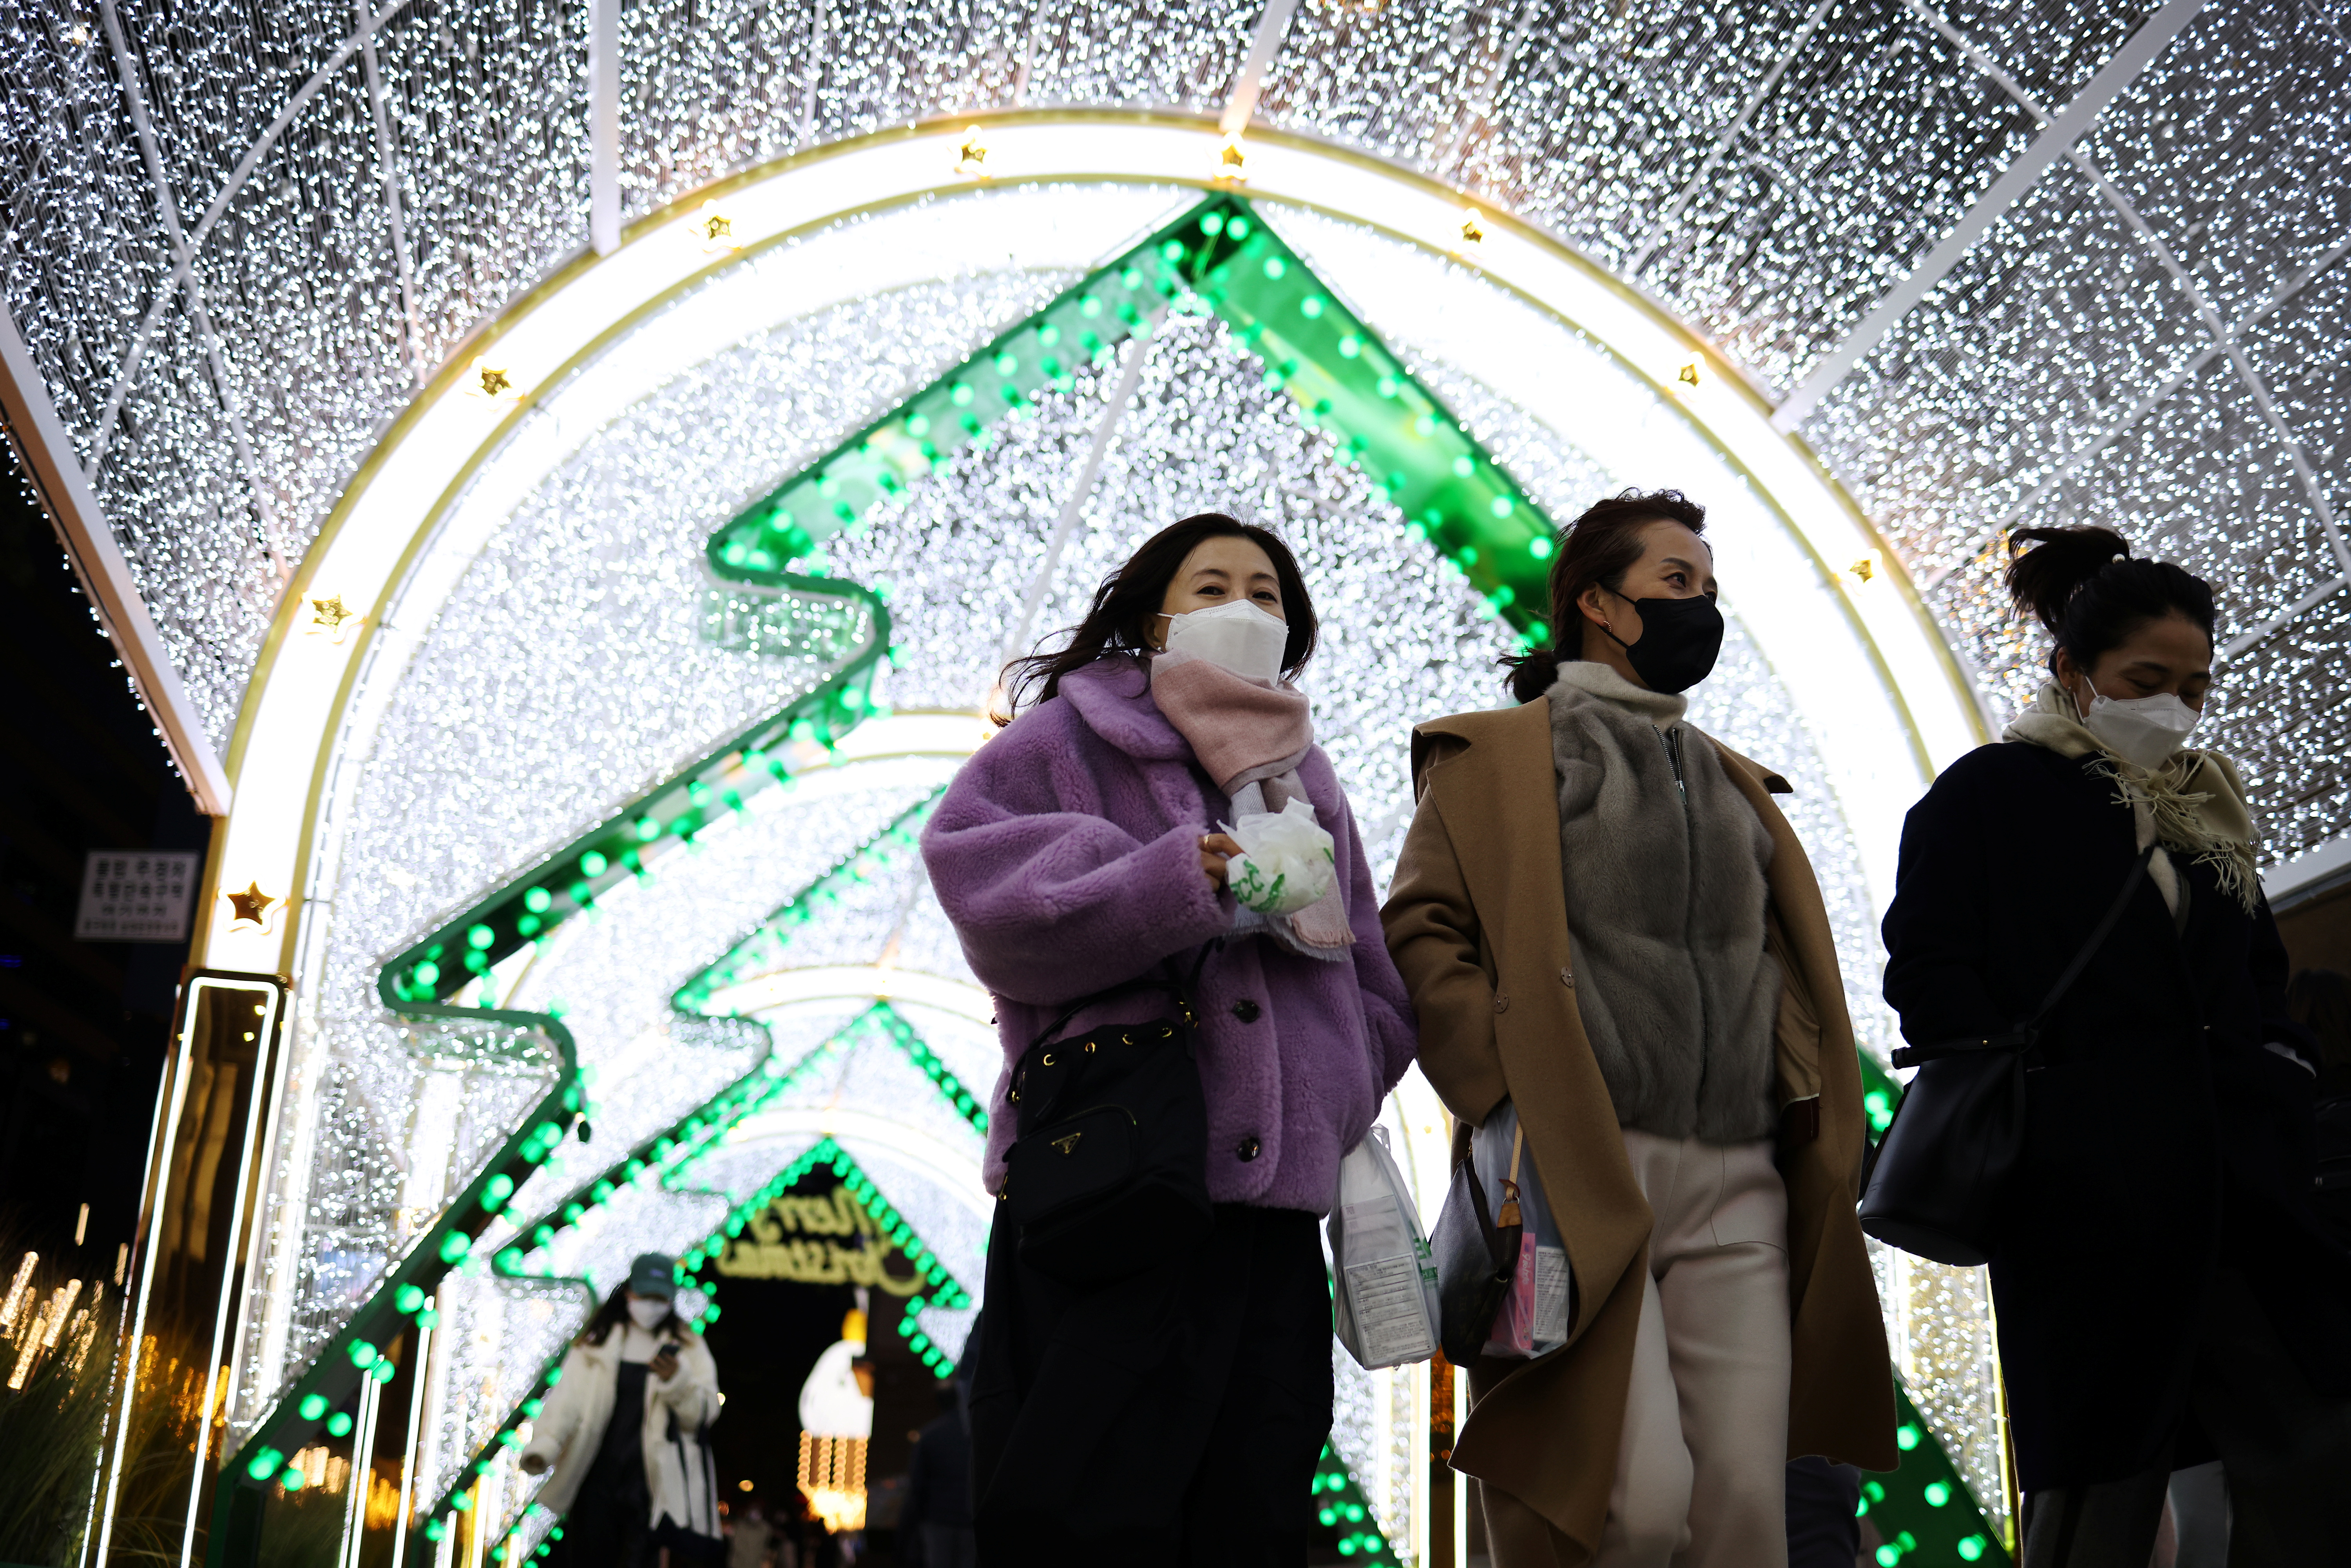 Women wearing masks to prevent contracting the coronavirus disease (COVID-19) walk under a Christmas illumination at a shopping district in central Seoul